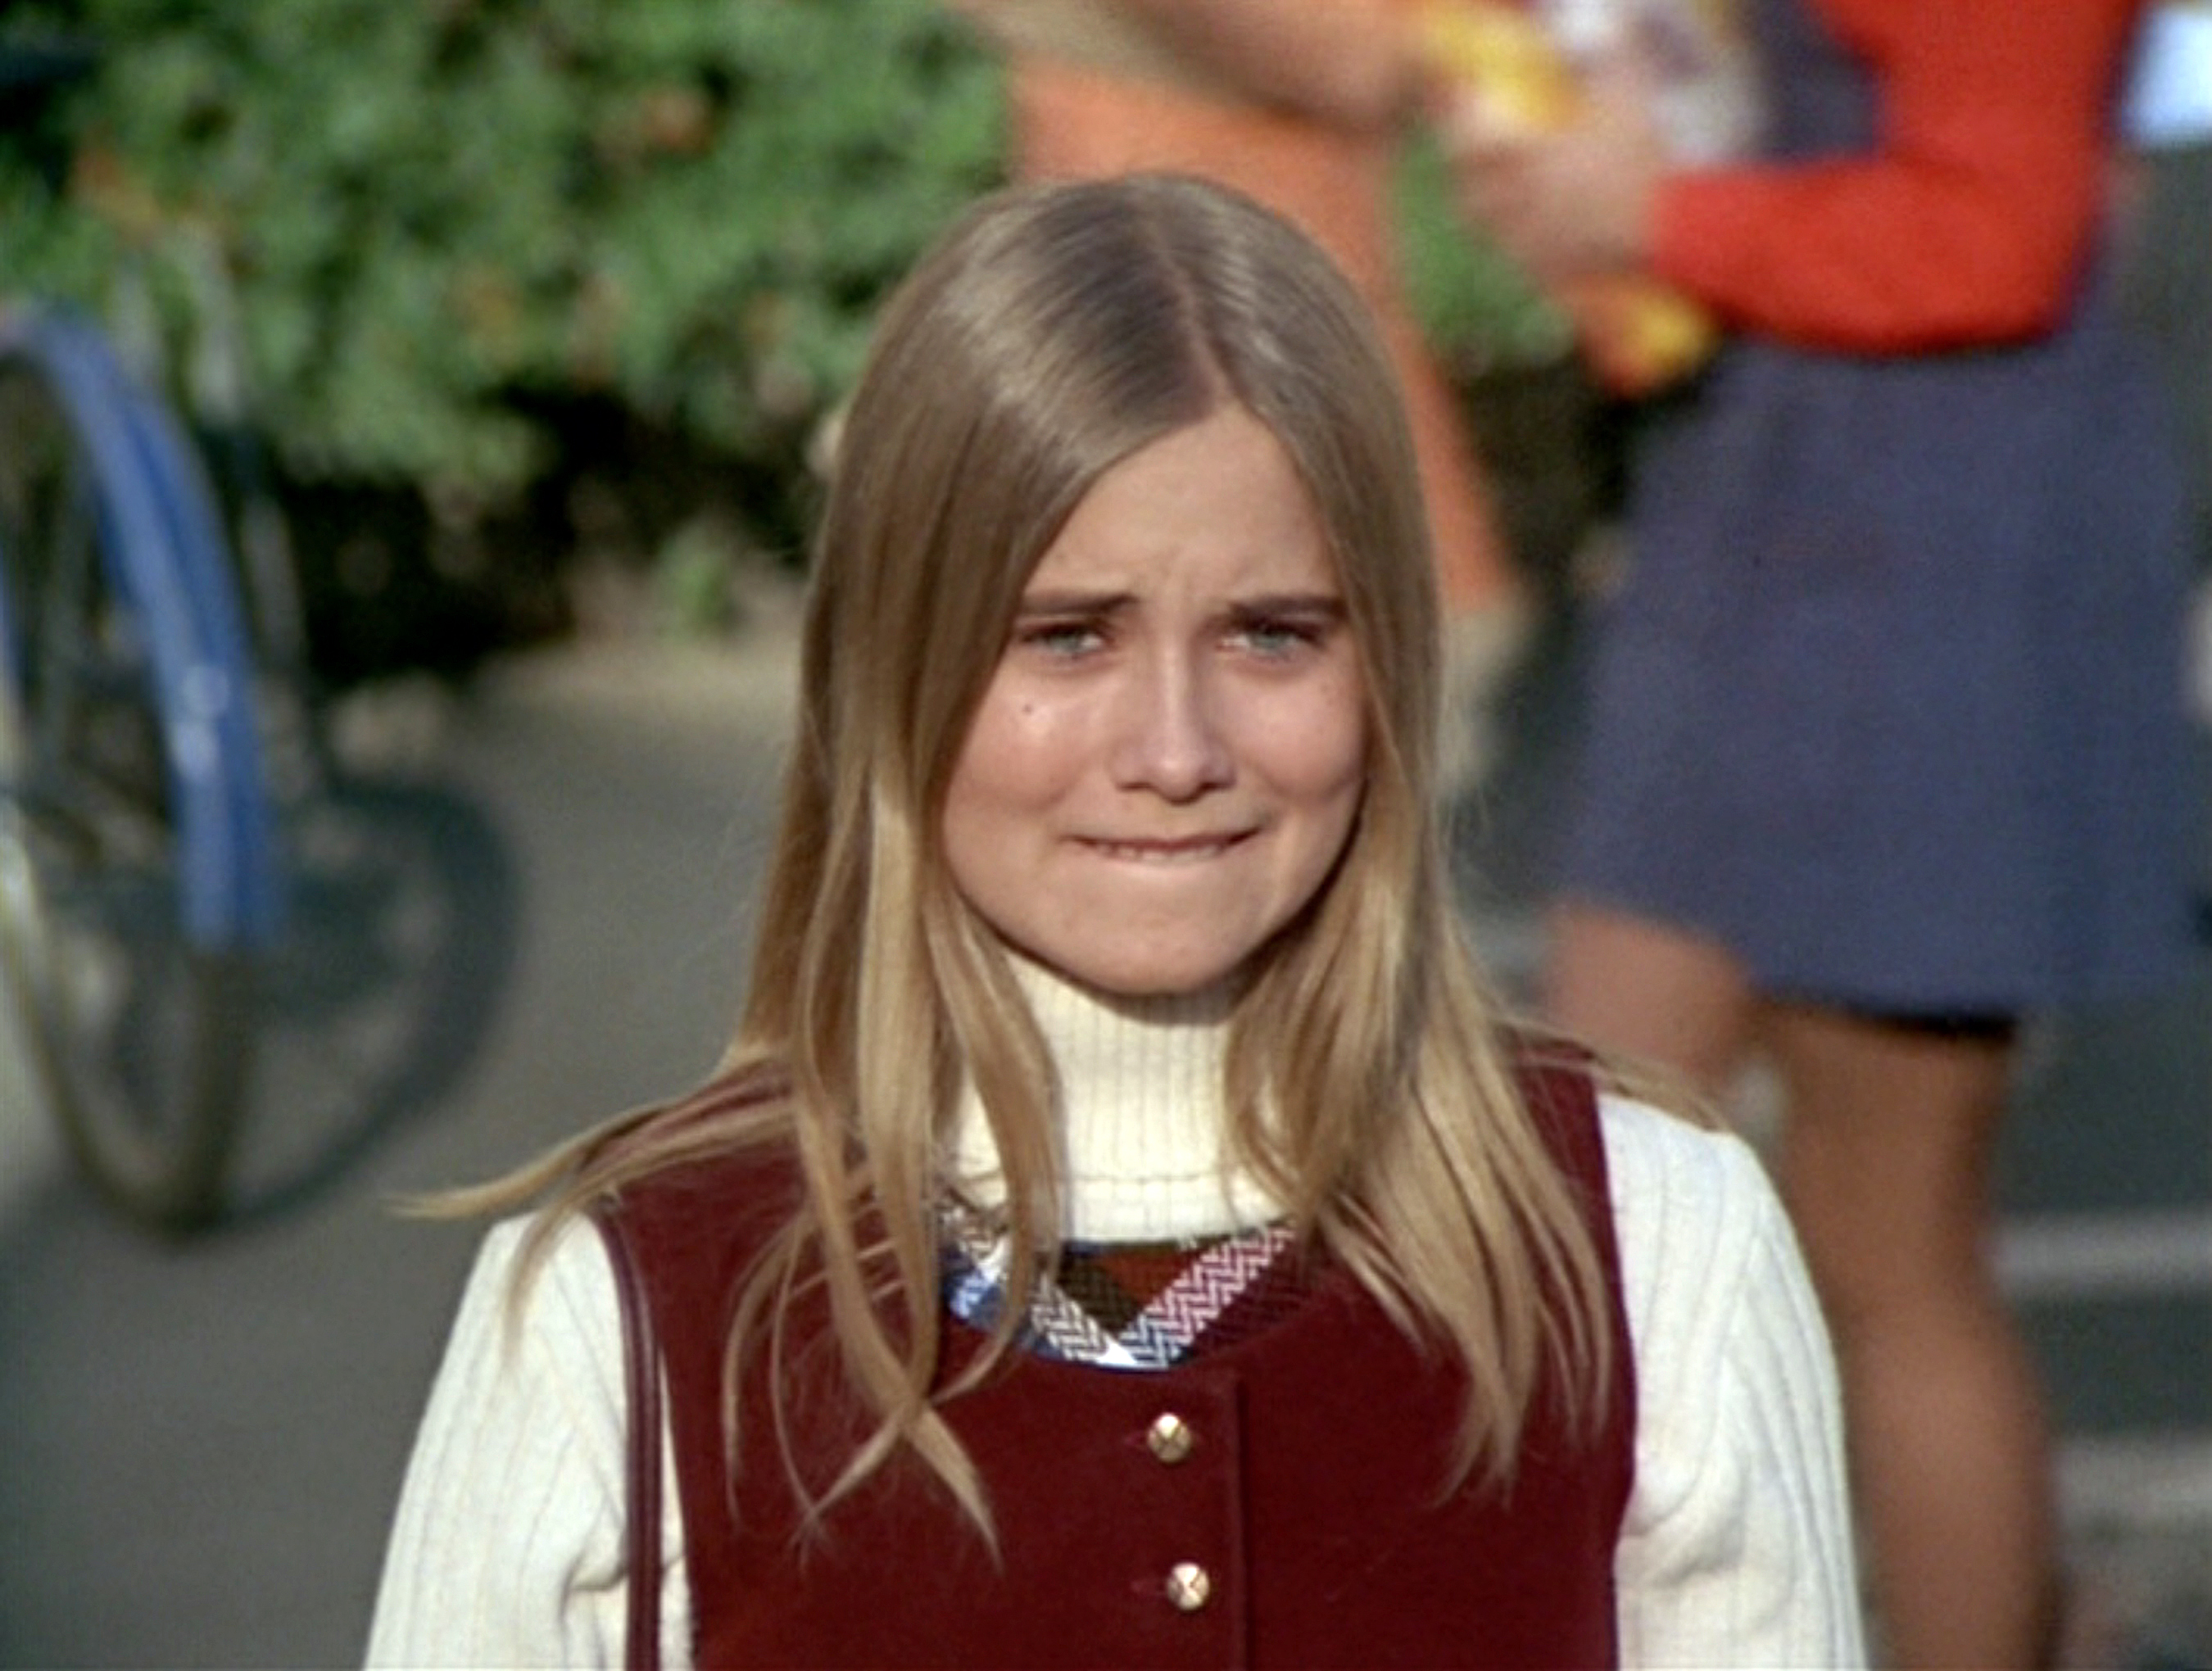 Maureen McCormick as Marcia Brady in the "Getting Davy Jones" episode of "The Brady Bunch" in Los Angeles, 1971 | Source: Getty Images